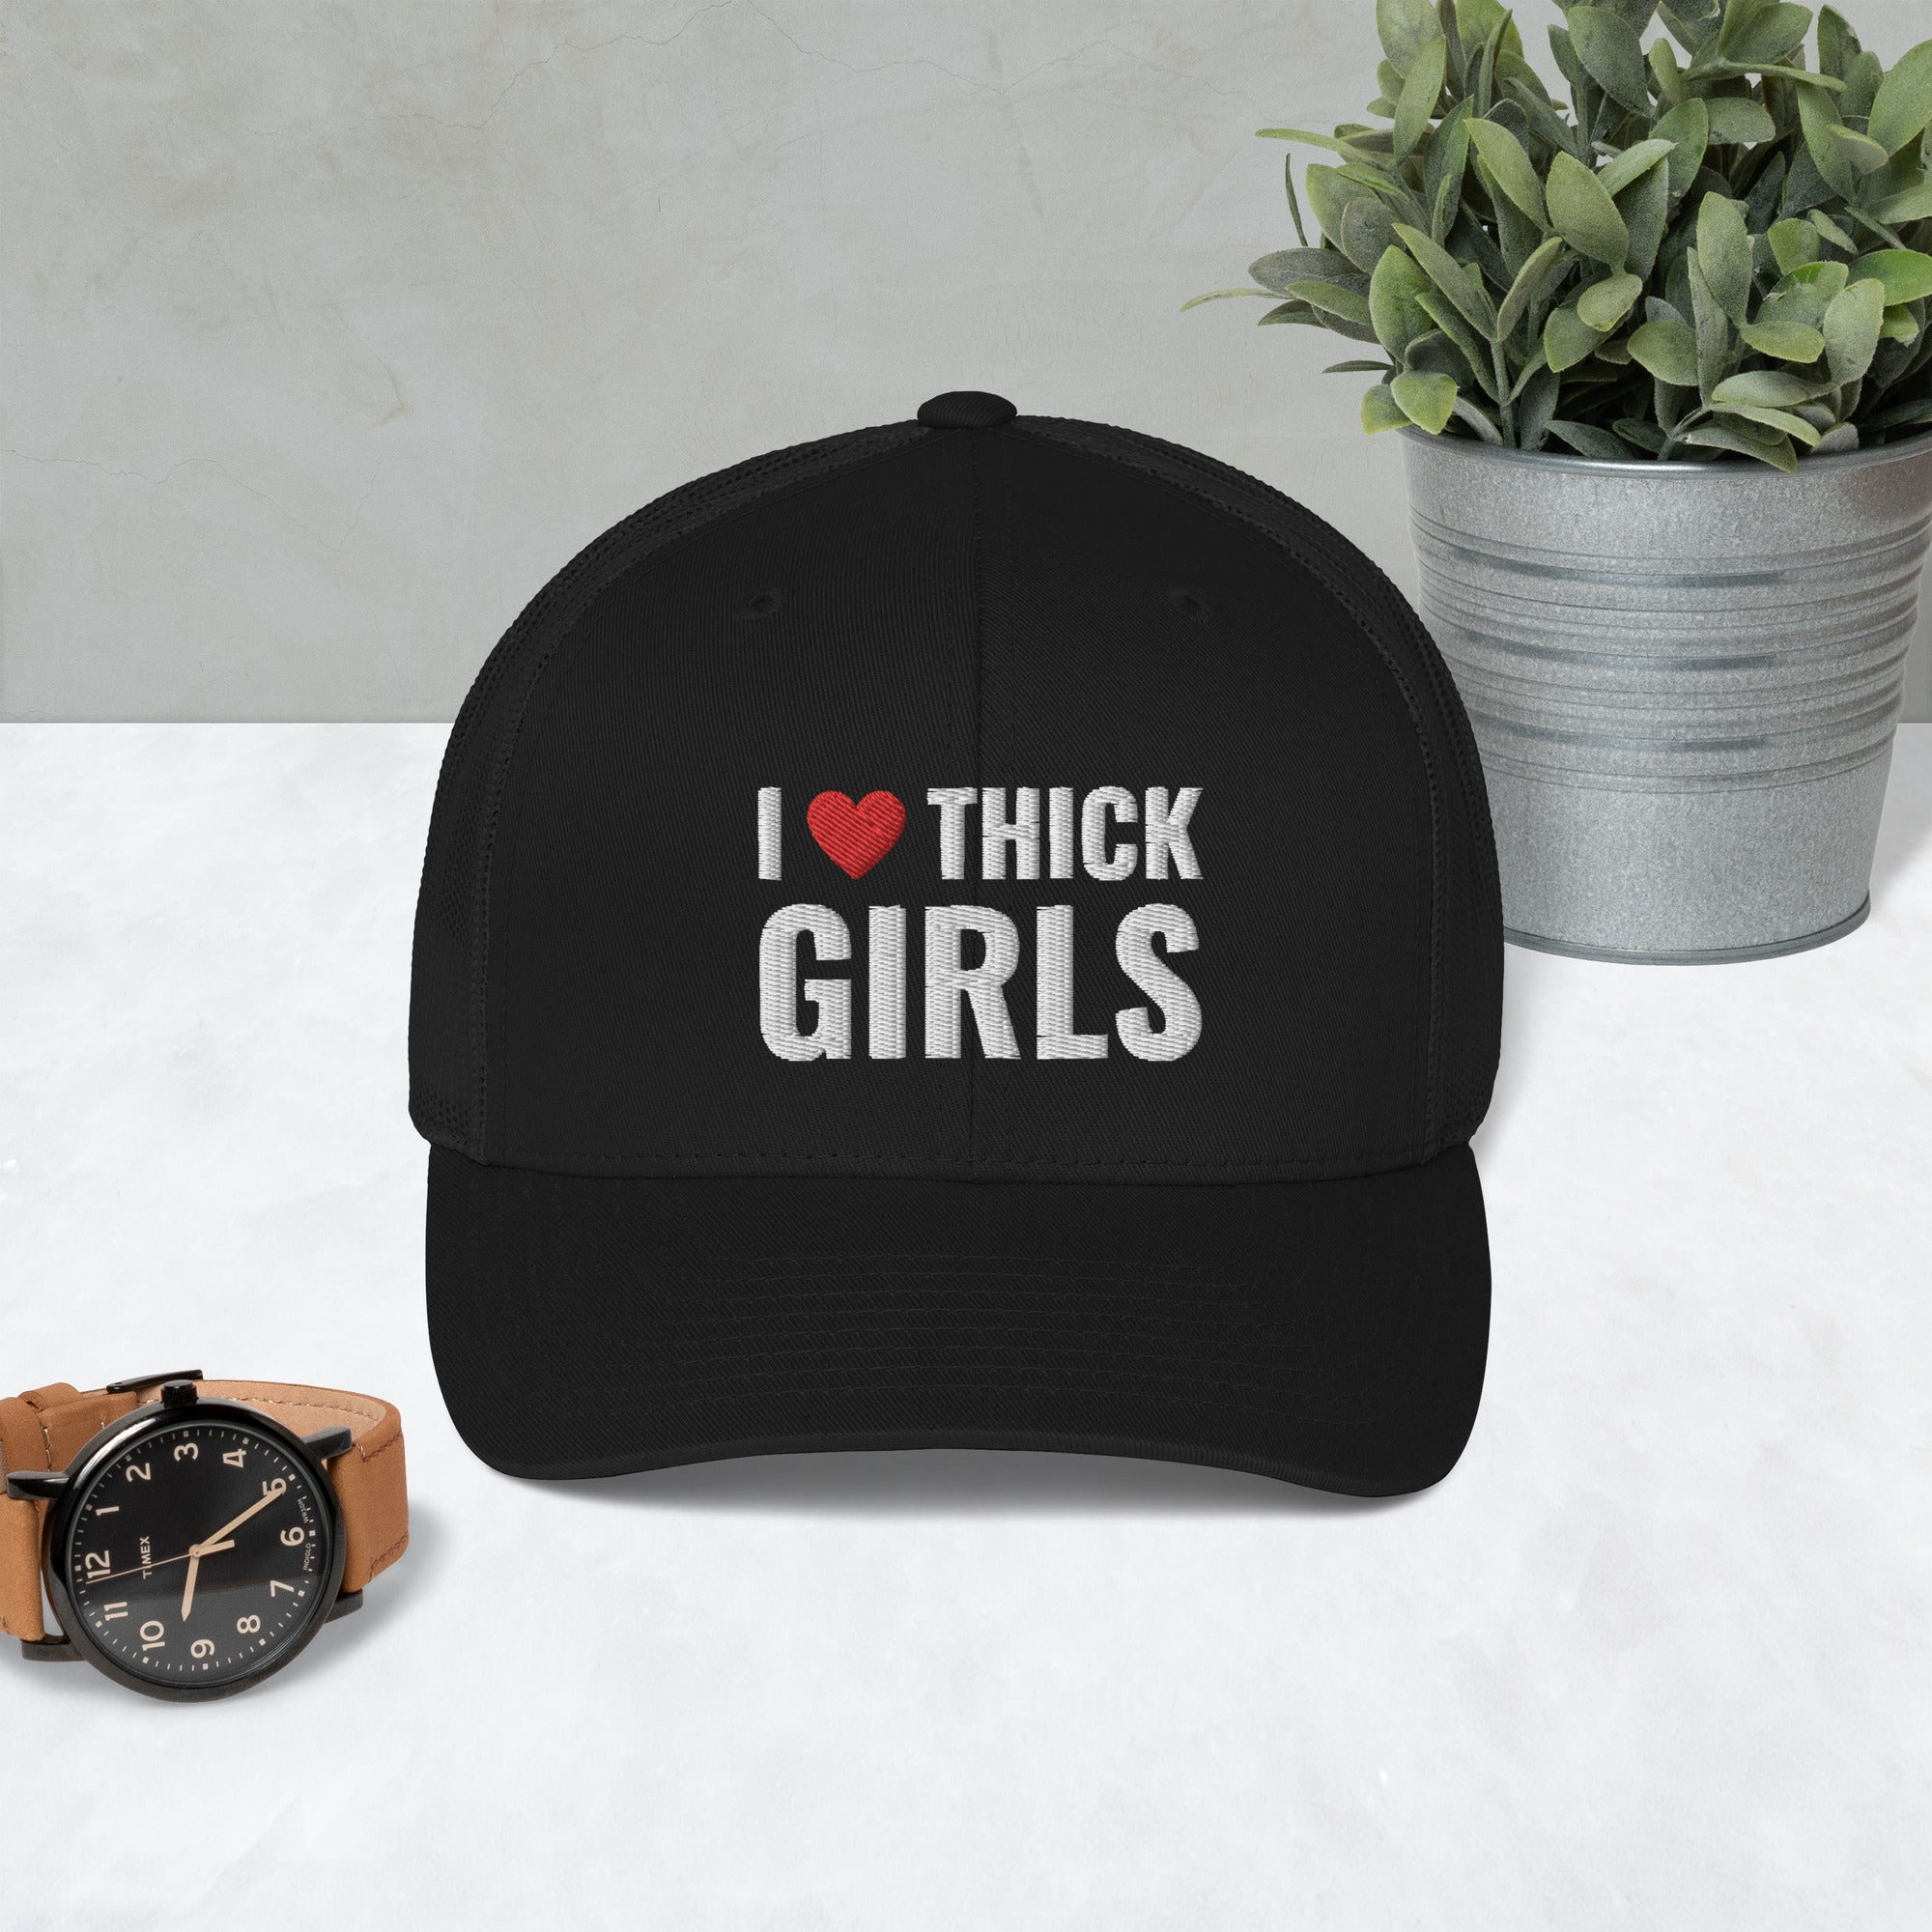 I love thick girls embroidered hat, Funny hot girls hat, hot moms baseball cap, Funny dad hat, Trucker Cap, Thick girl hat - Madeinsea©